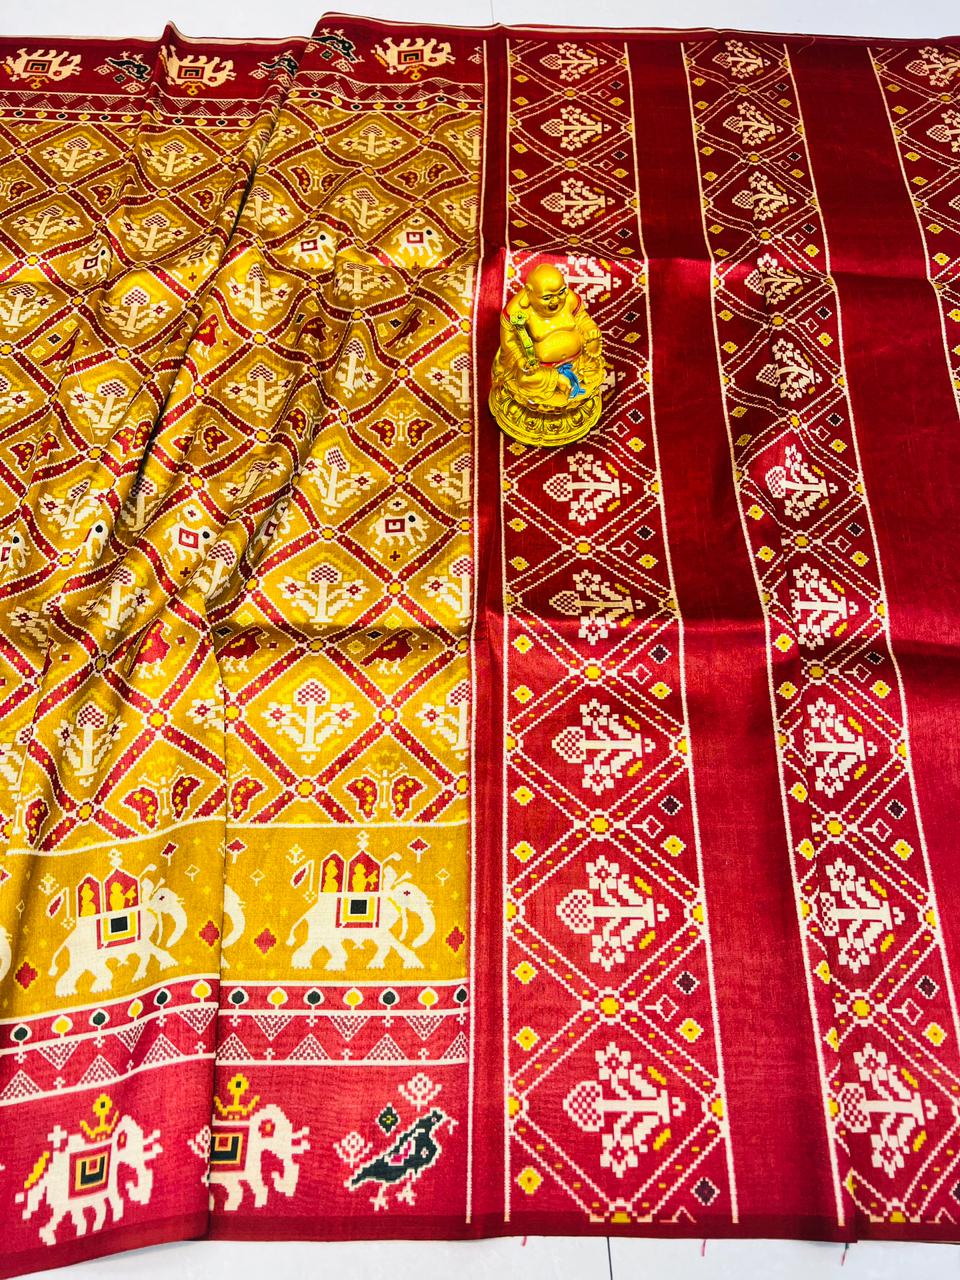 Beleaguer Yellow Patola Silk Saree with Moiety Blouse Piece